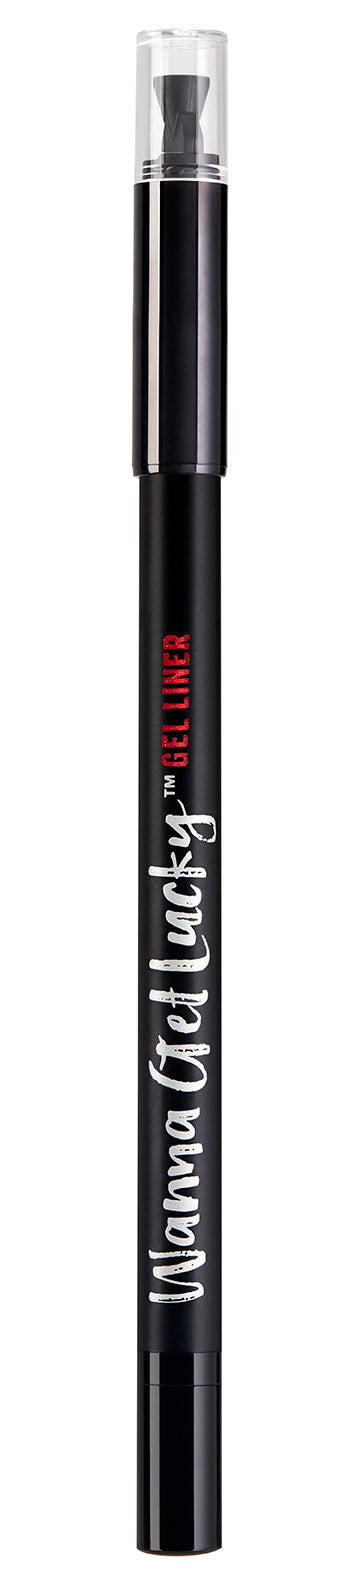 Close-up of an Ardell Wanna Get Lucky Gel Liner Ink-Jet Black standing upright side by side with its cap